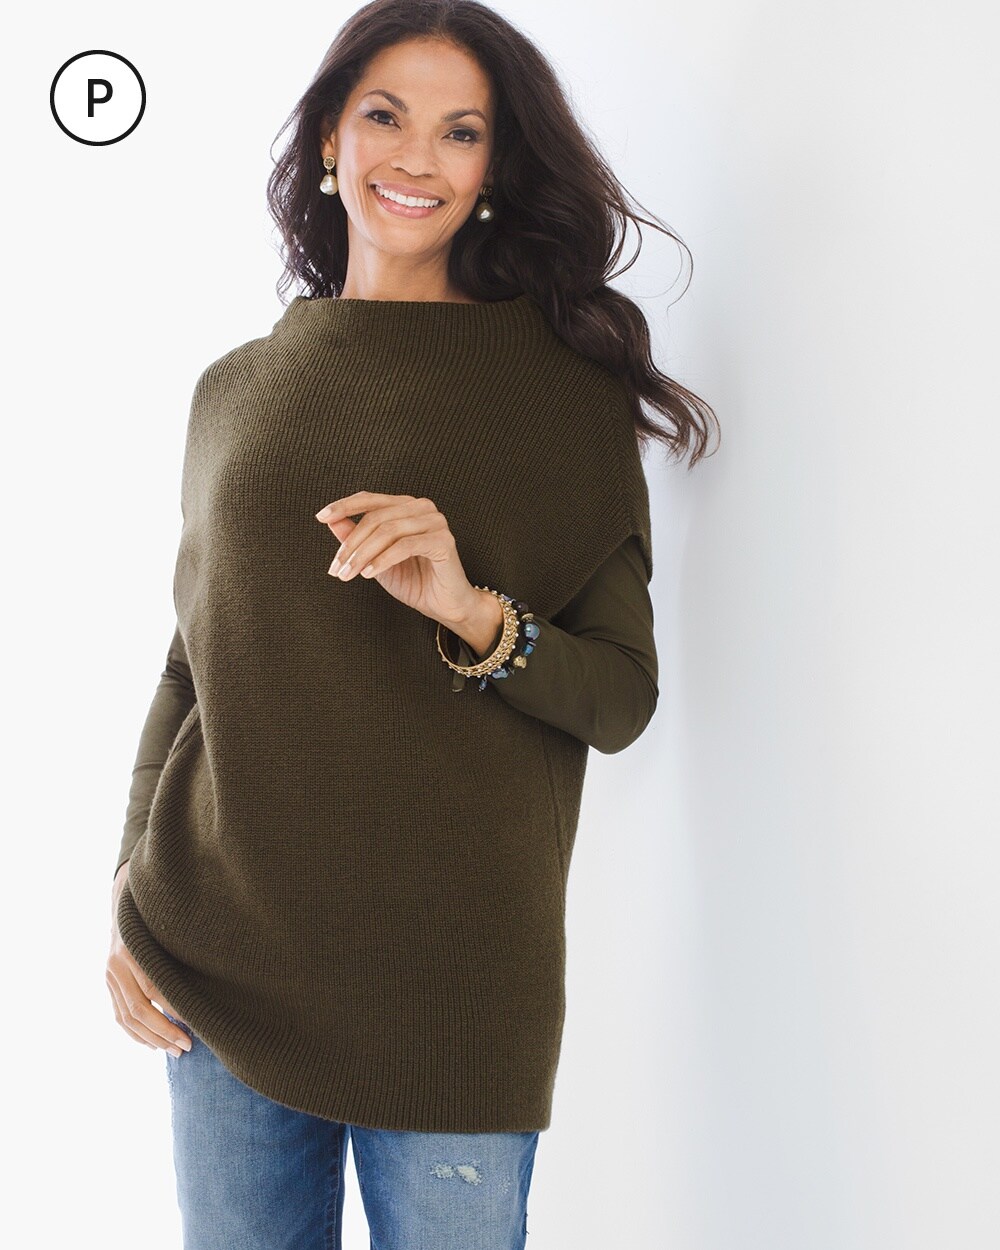 Petite Elle Pullover in Ambered Olive